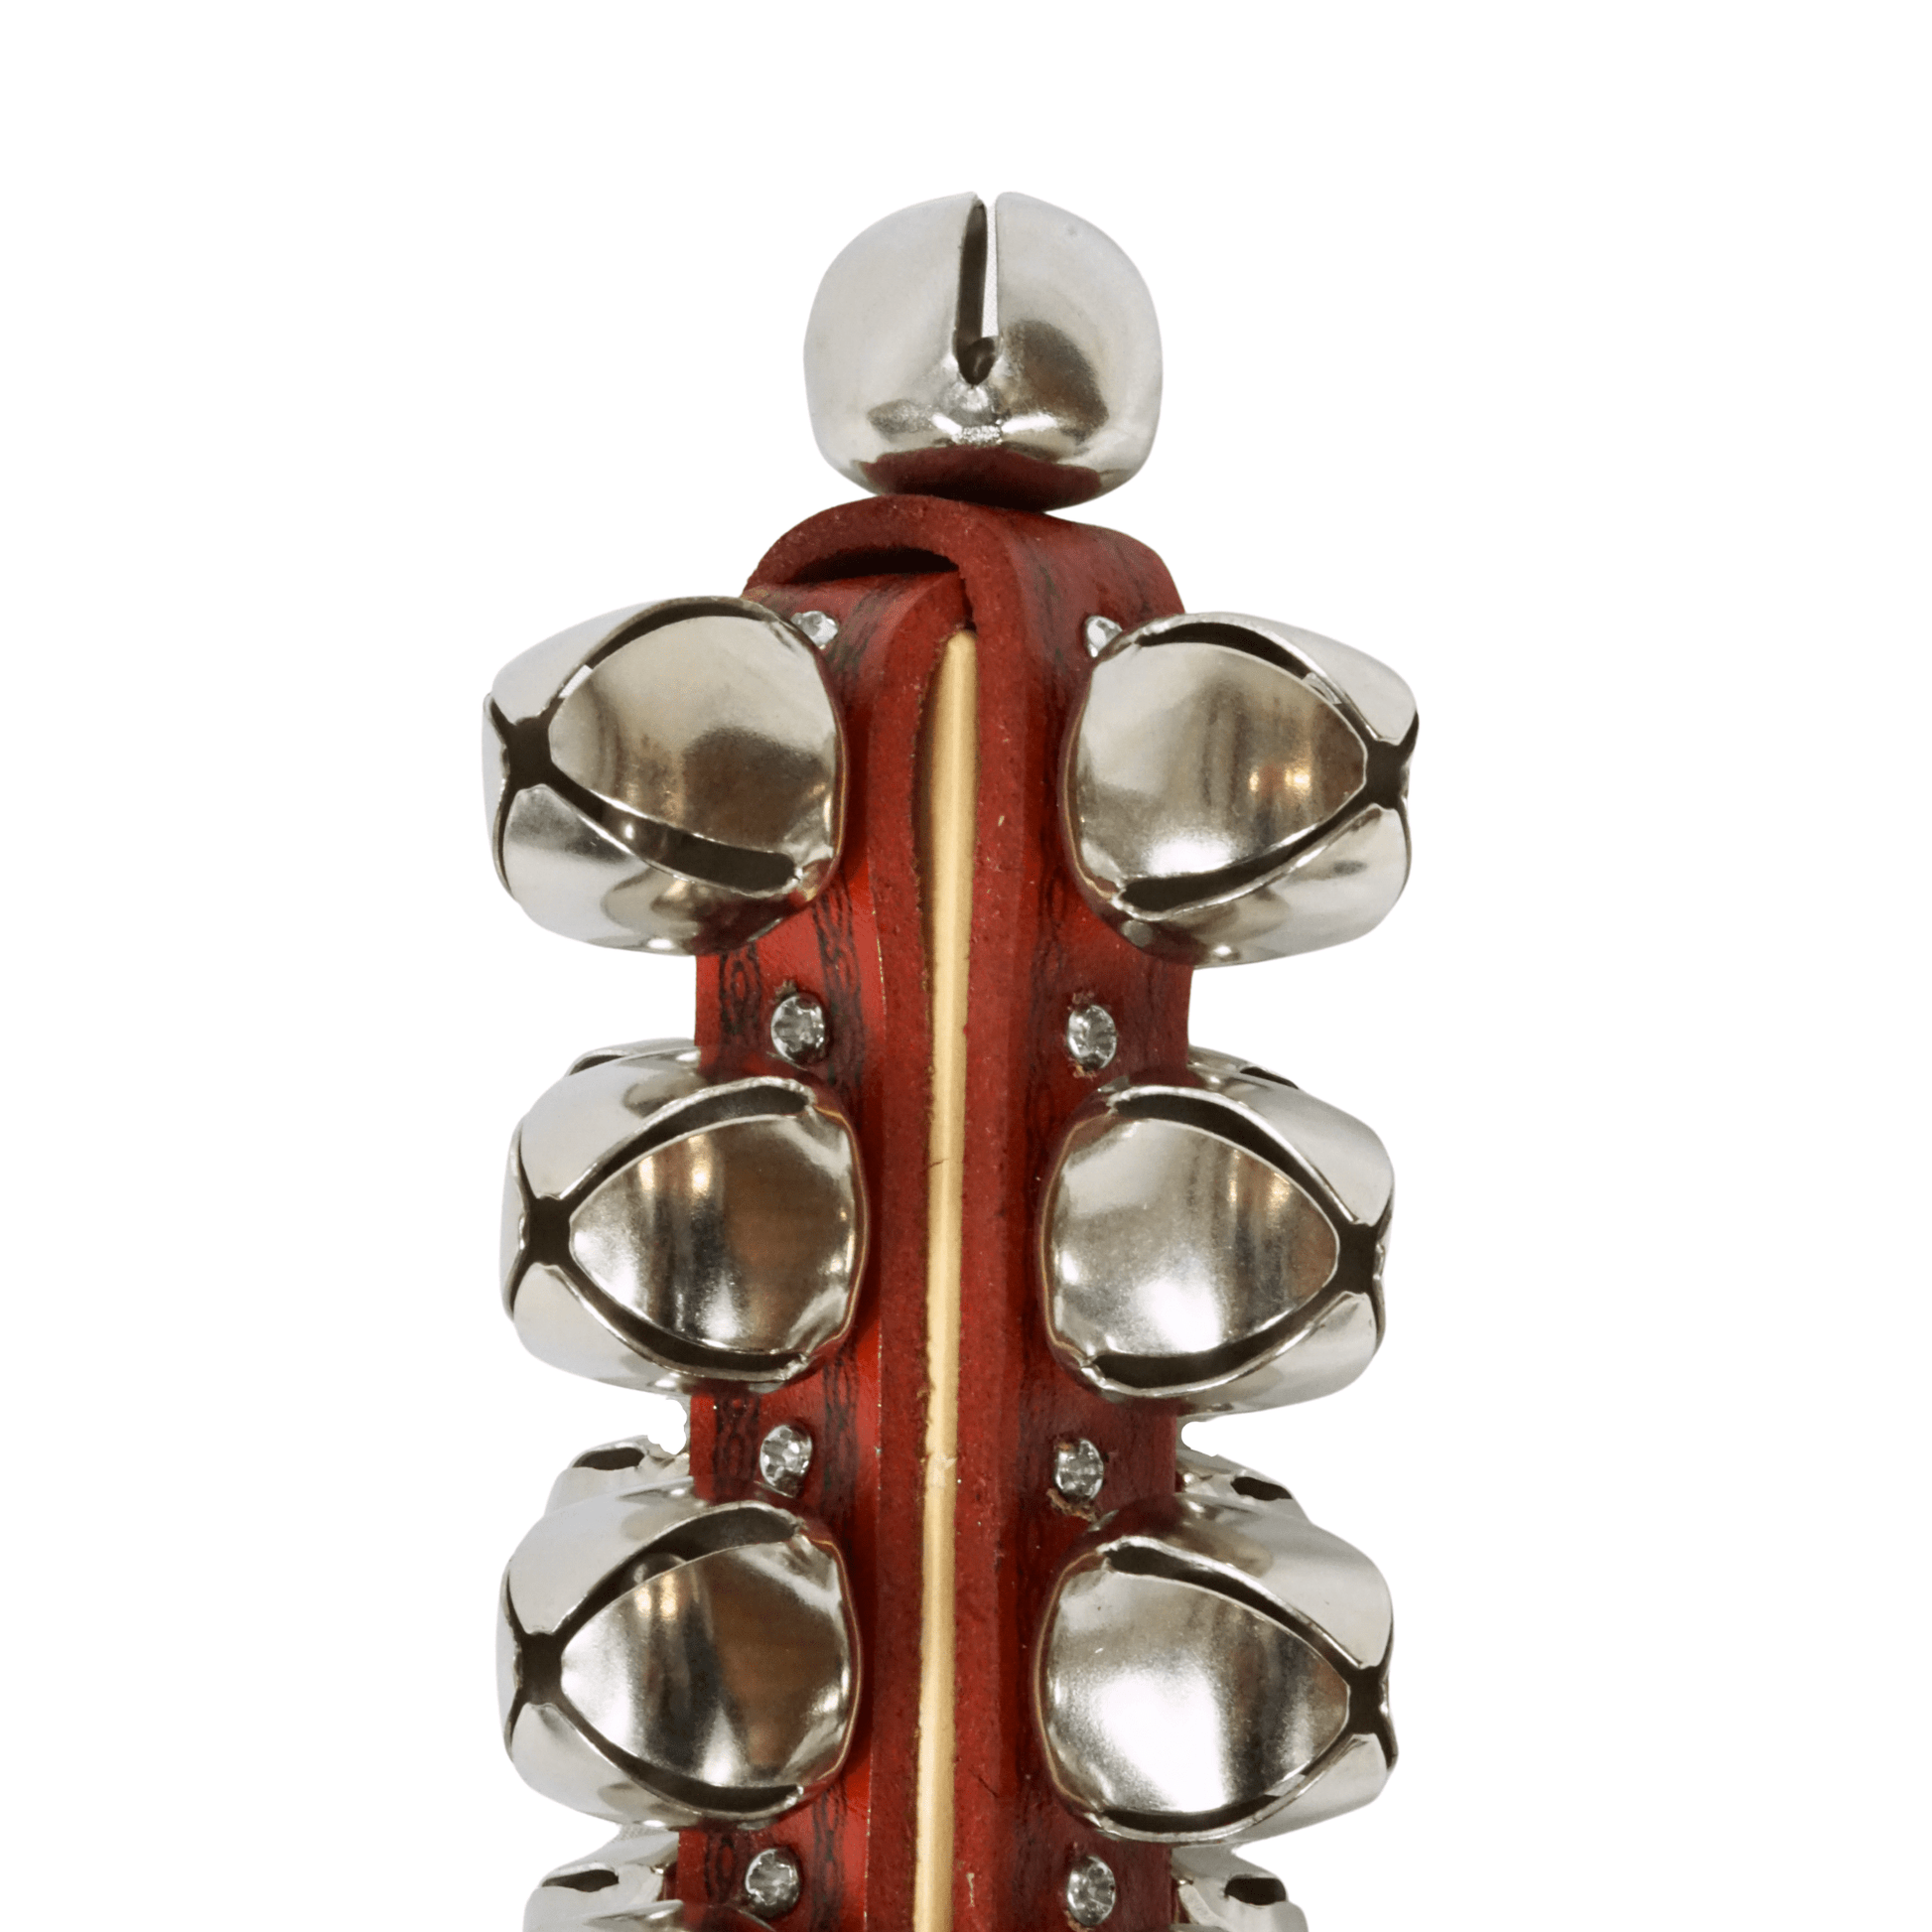 Sleigh Bells (25-bells) With Handle - E707 - Empire Music Co. Ltd-Sleigh Bell-Groove Masters Percussion